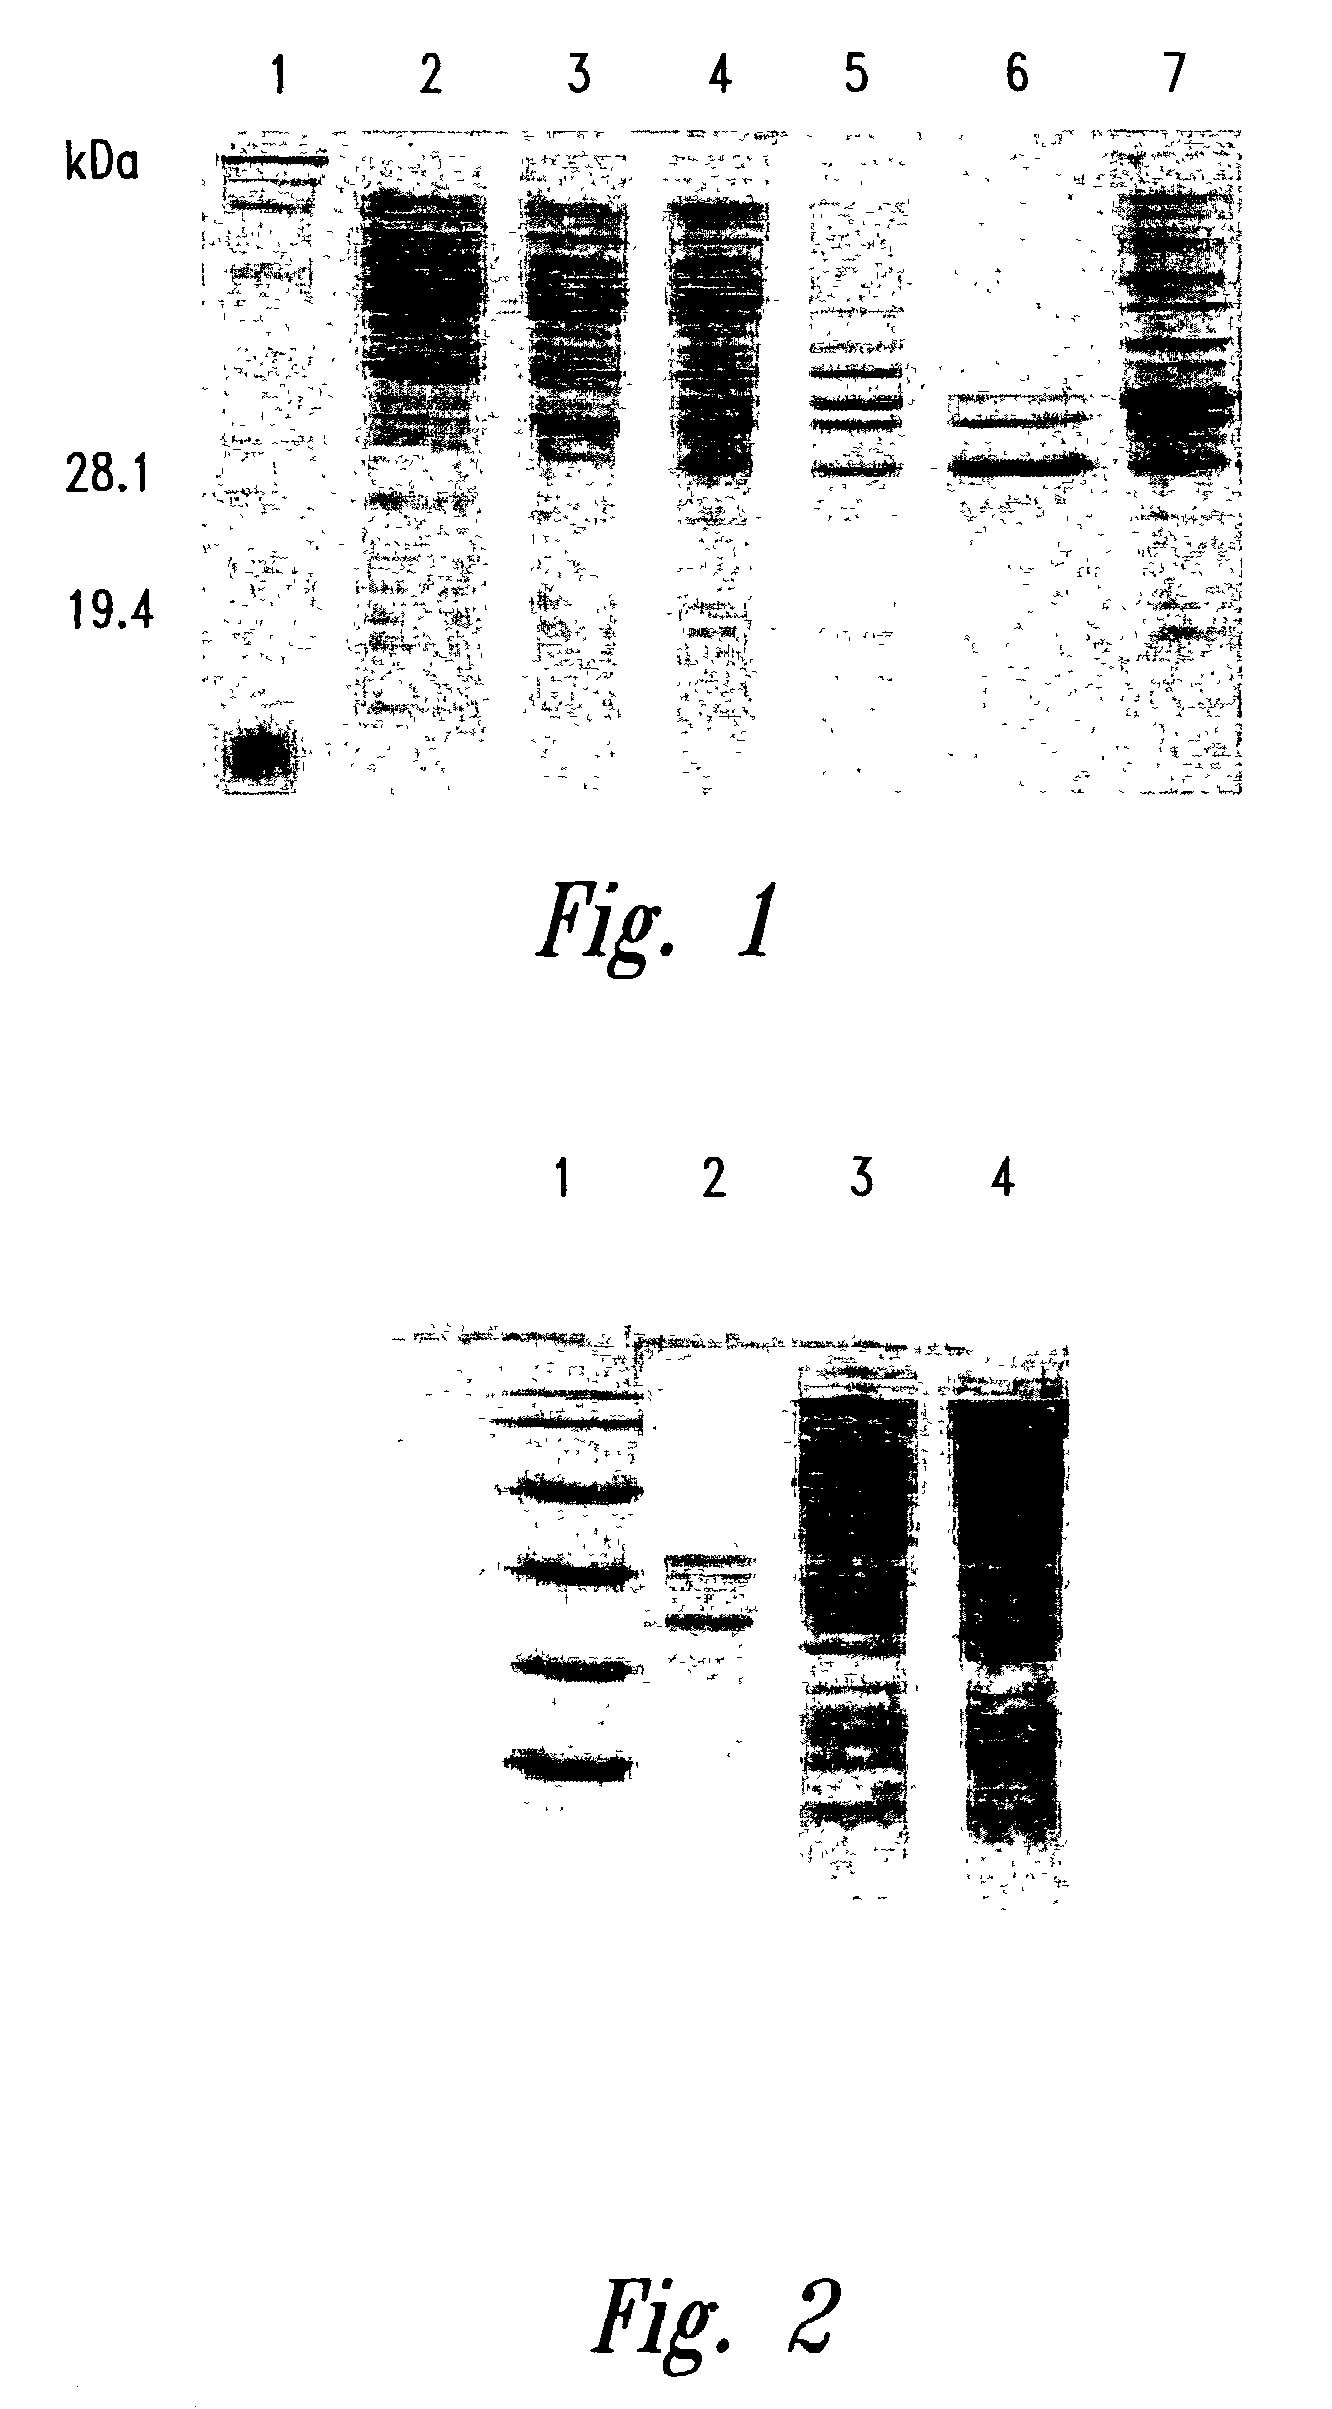 Compositions and methods for treating infections using cationic peptides alone or in combination with antibiotics